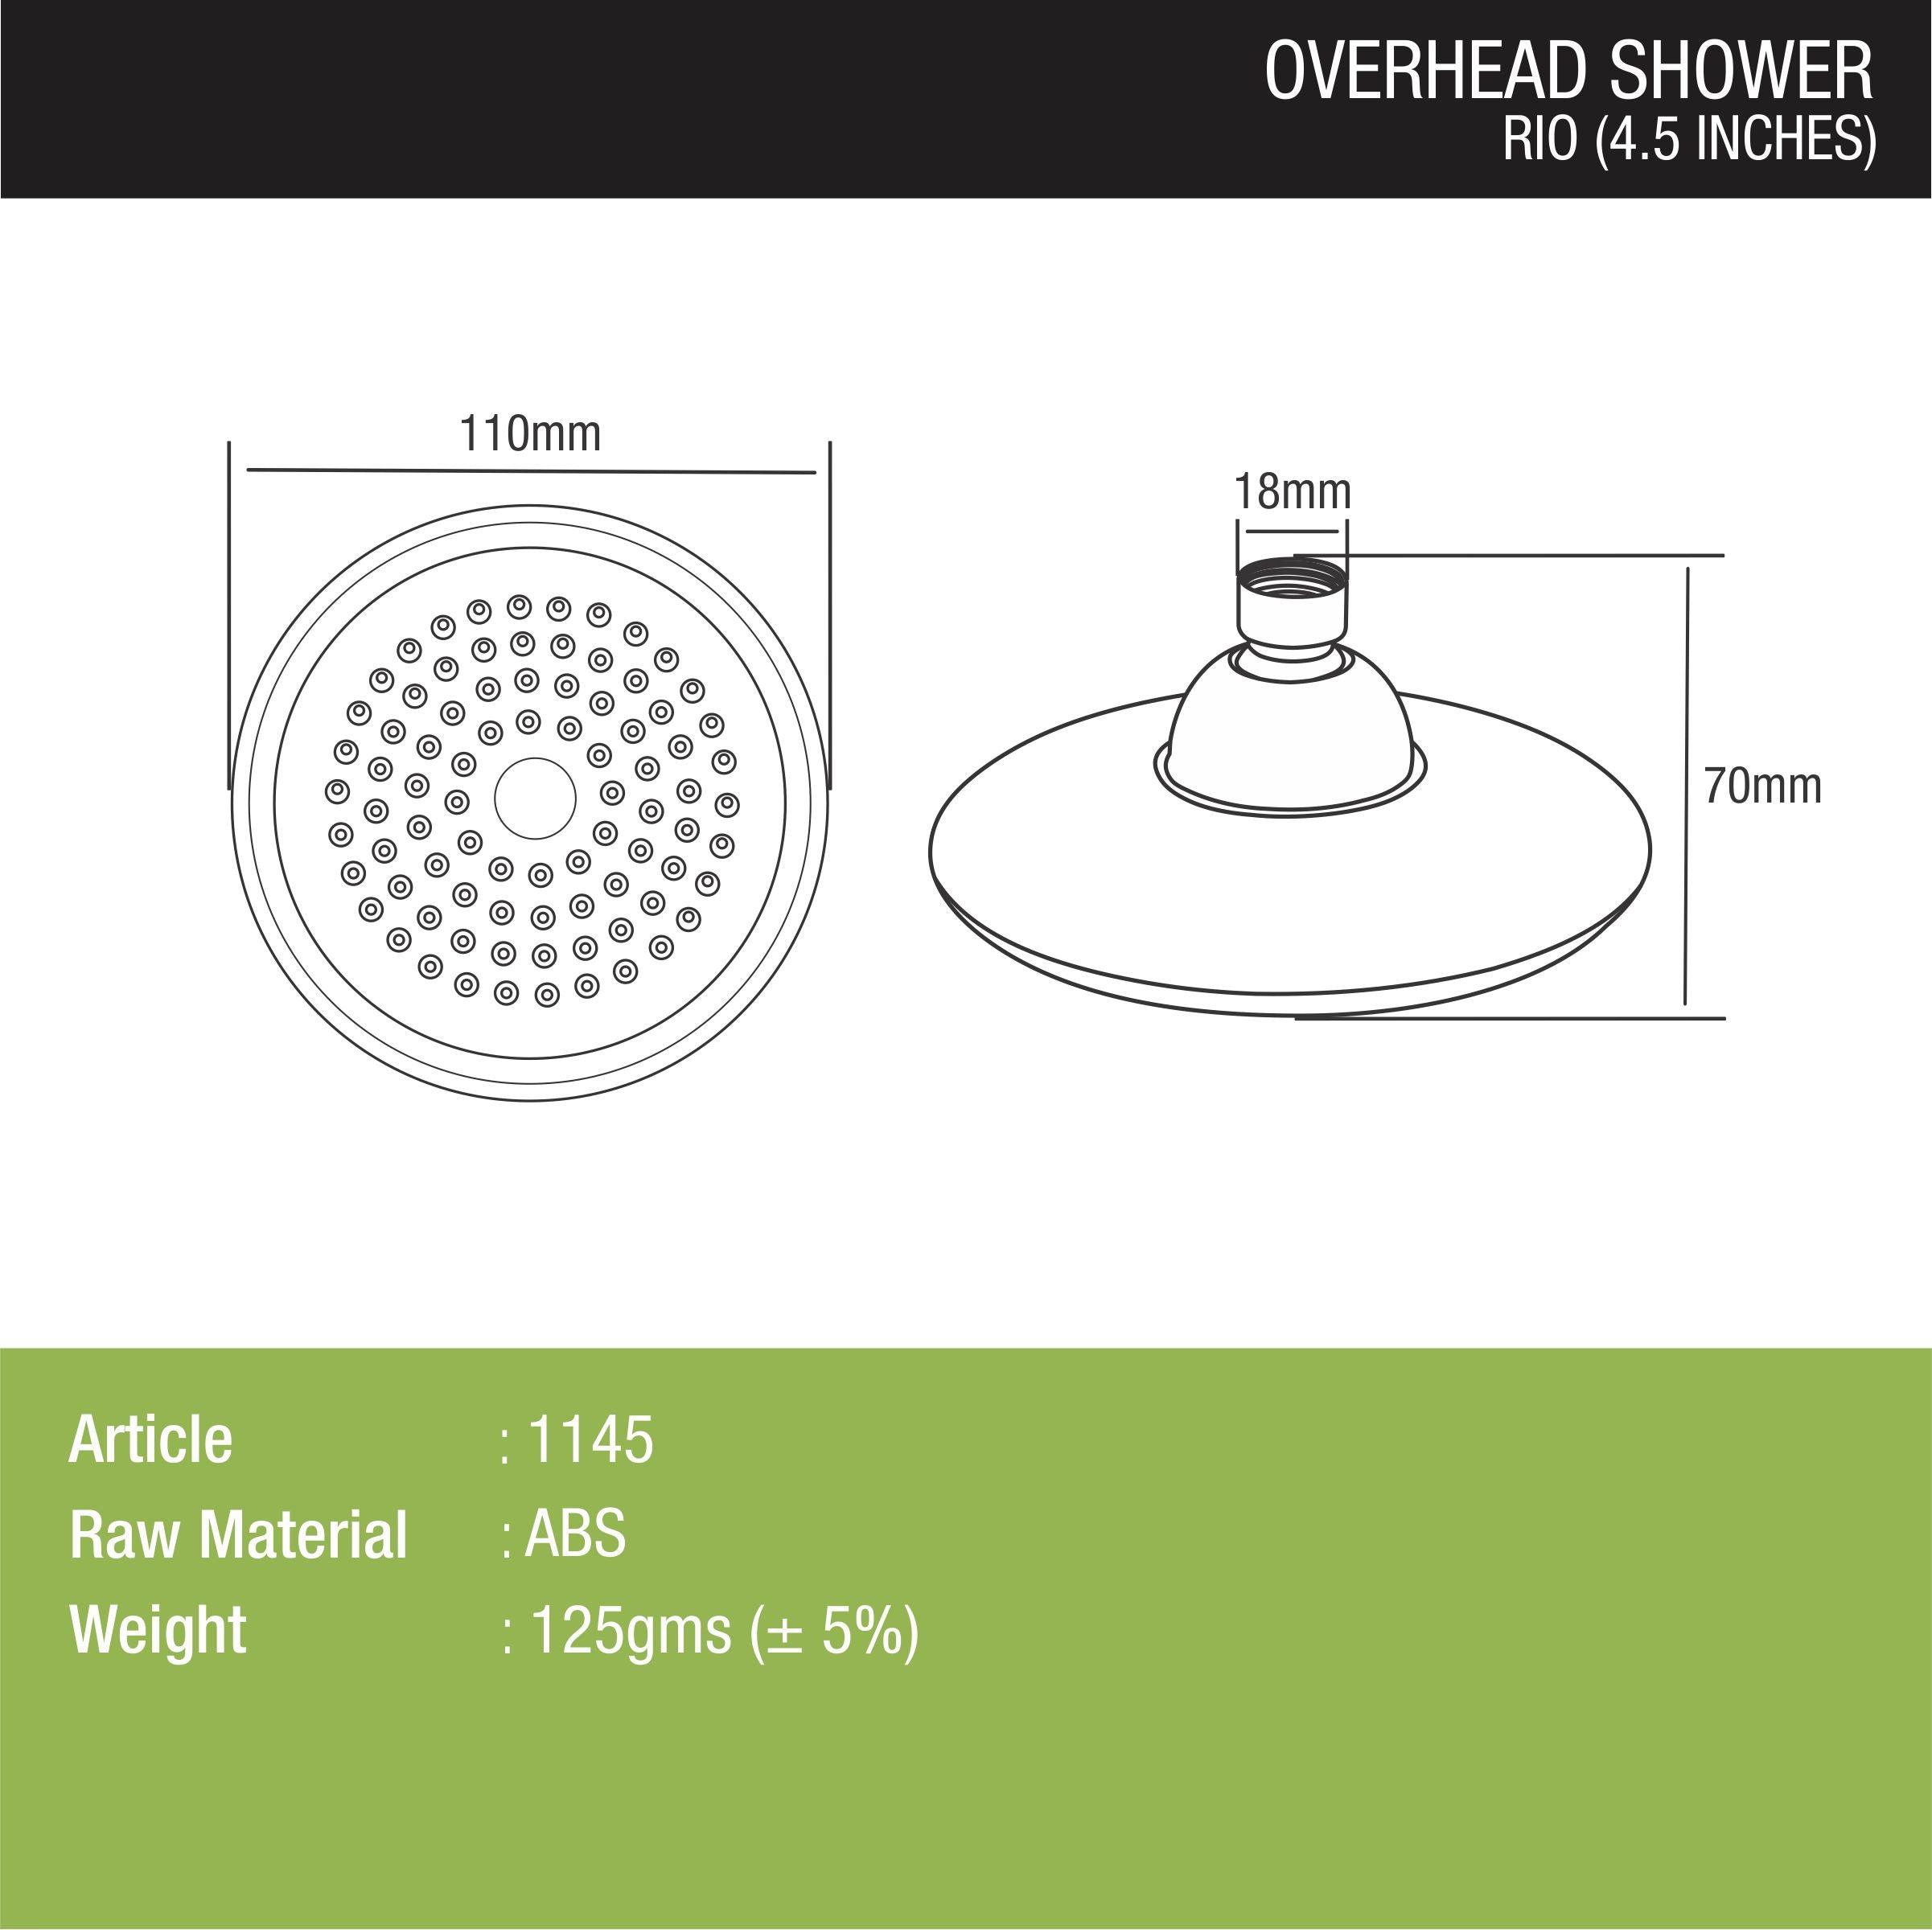 Rio Overhead Shower (4.5 Inches) dimensions and sizes